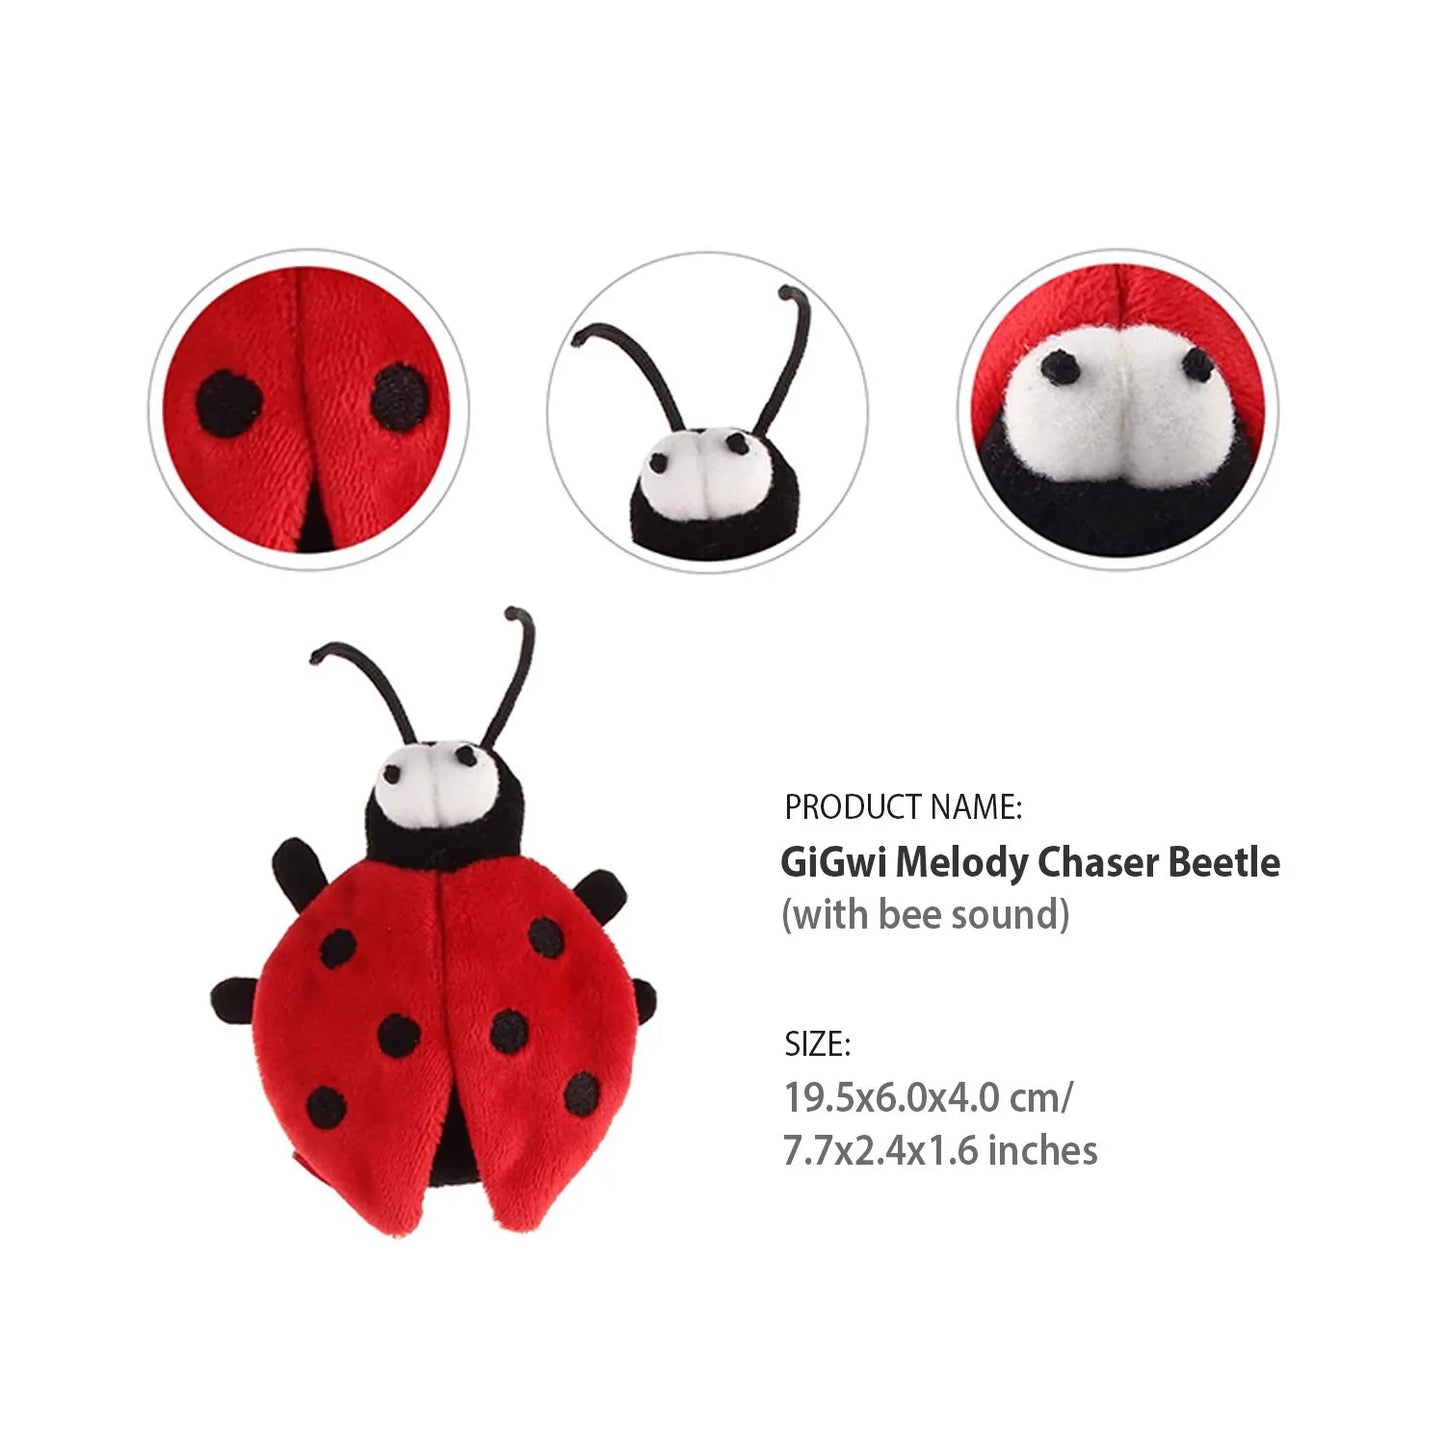 GiGwi-Bettle-Melody-Chaser-Cat-Toy-with-Motion-activated-Sound-Chip2 (1)